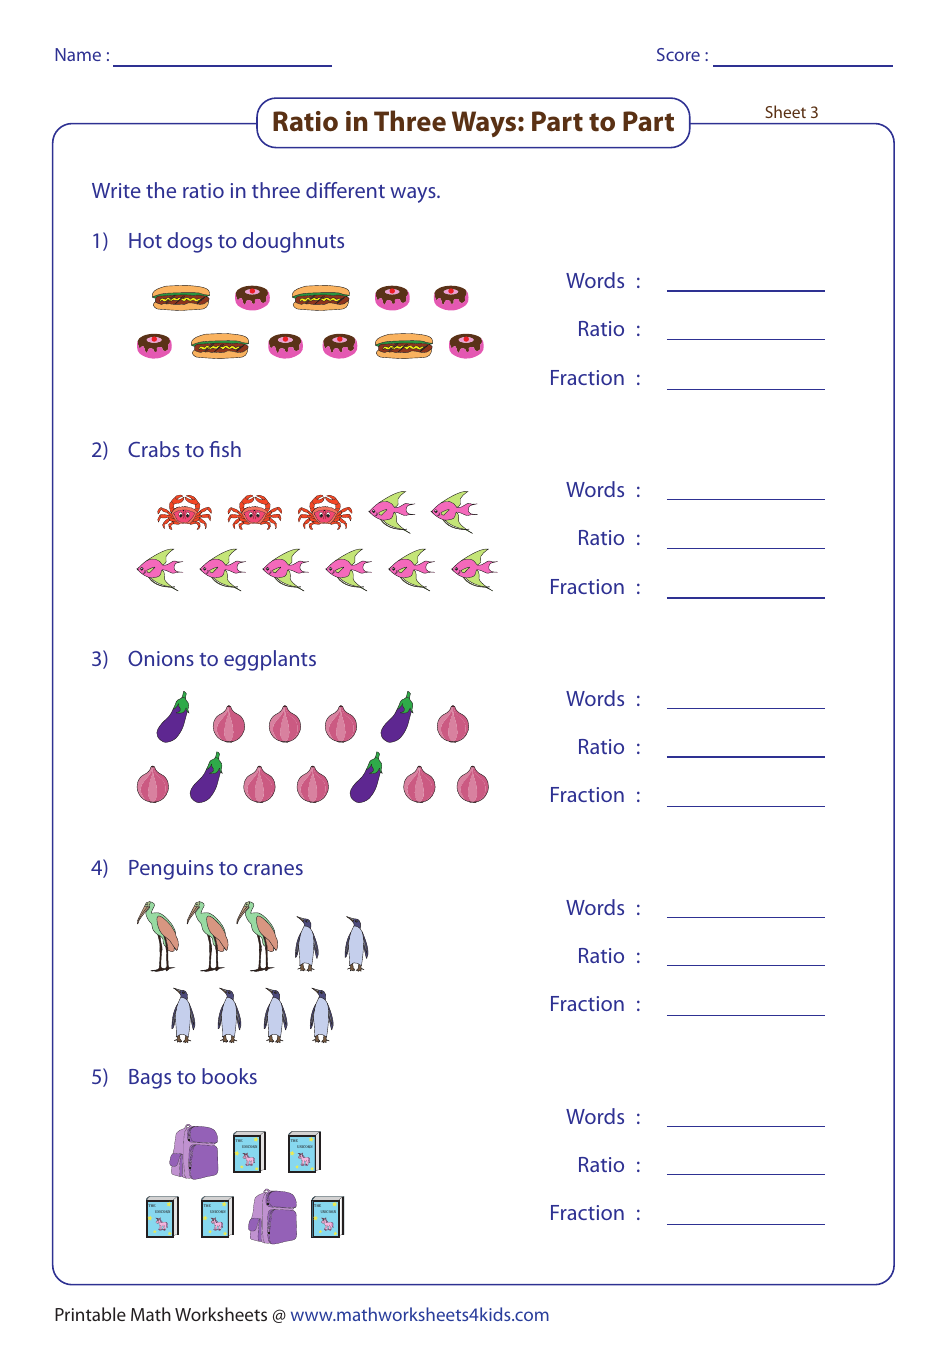 ratio-and-proportion-worksheet-pdf